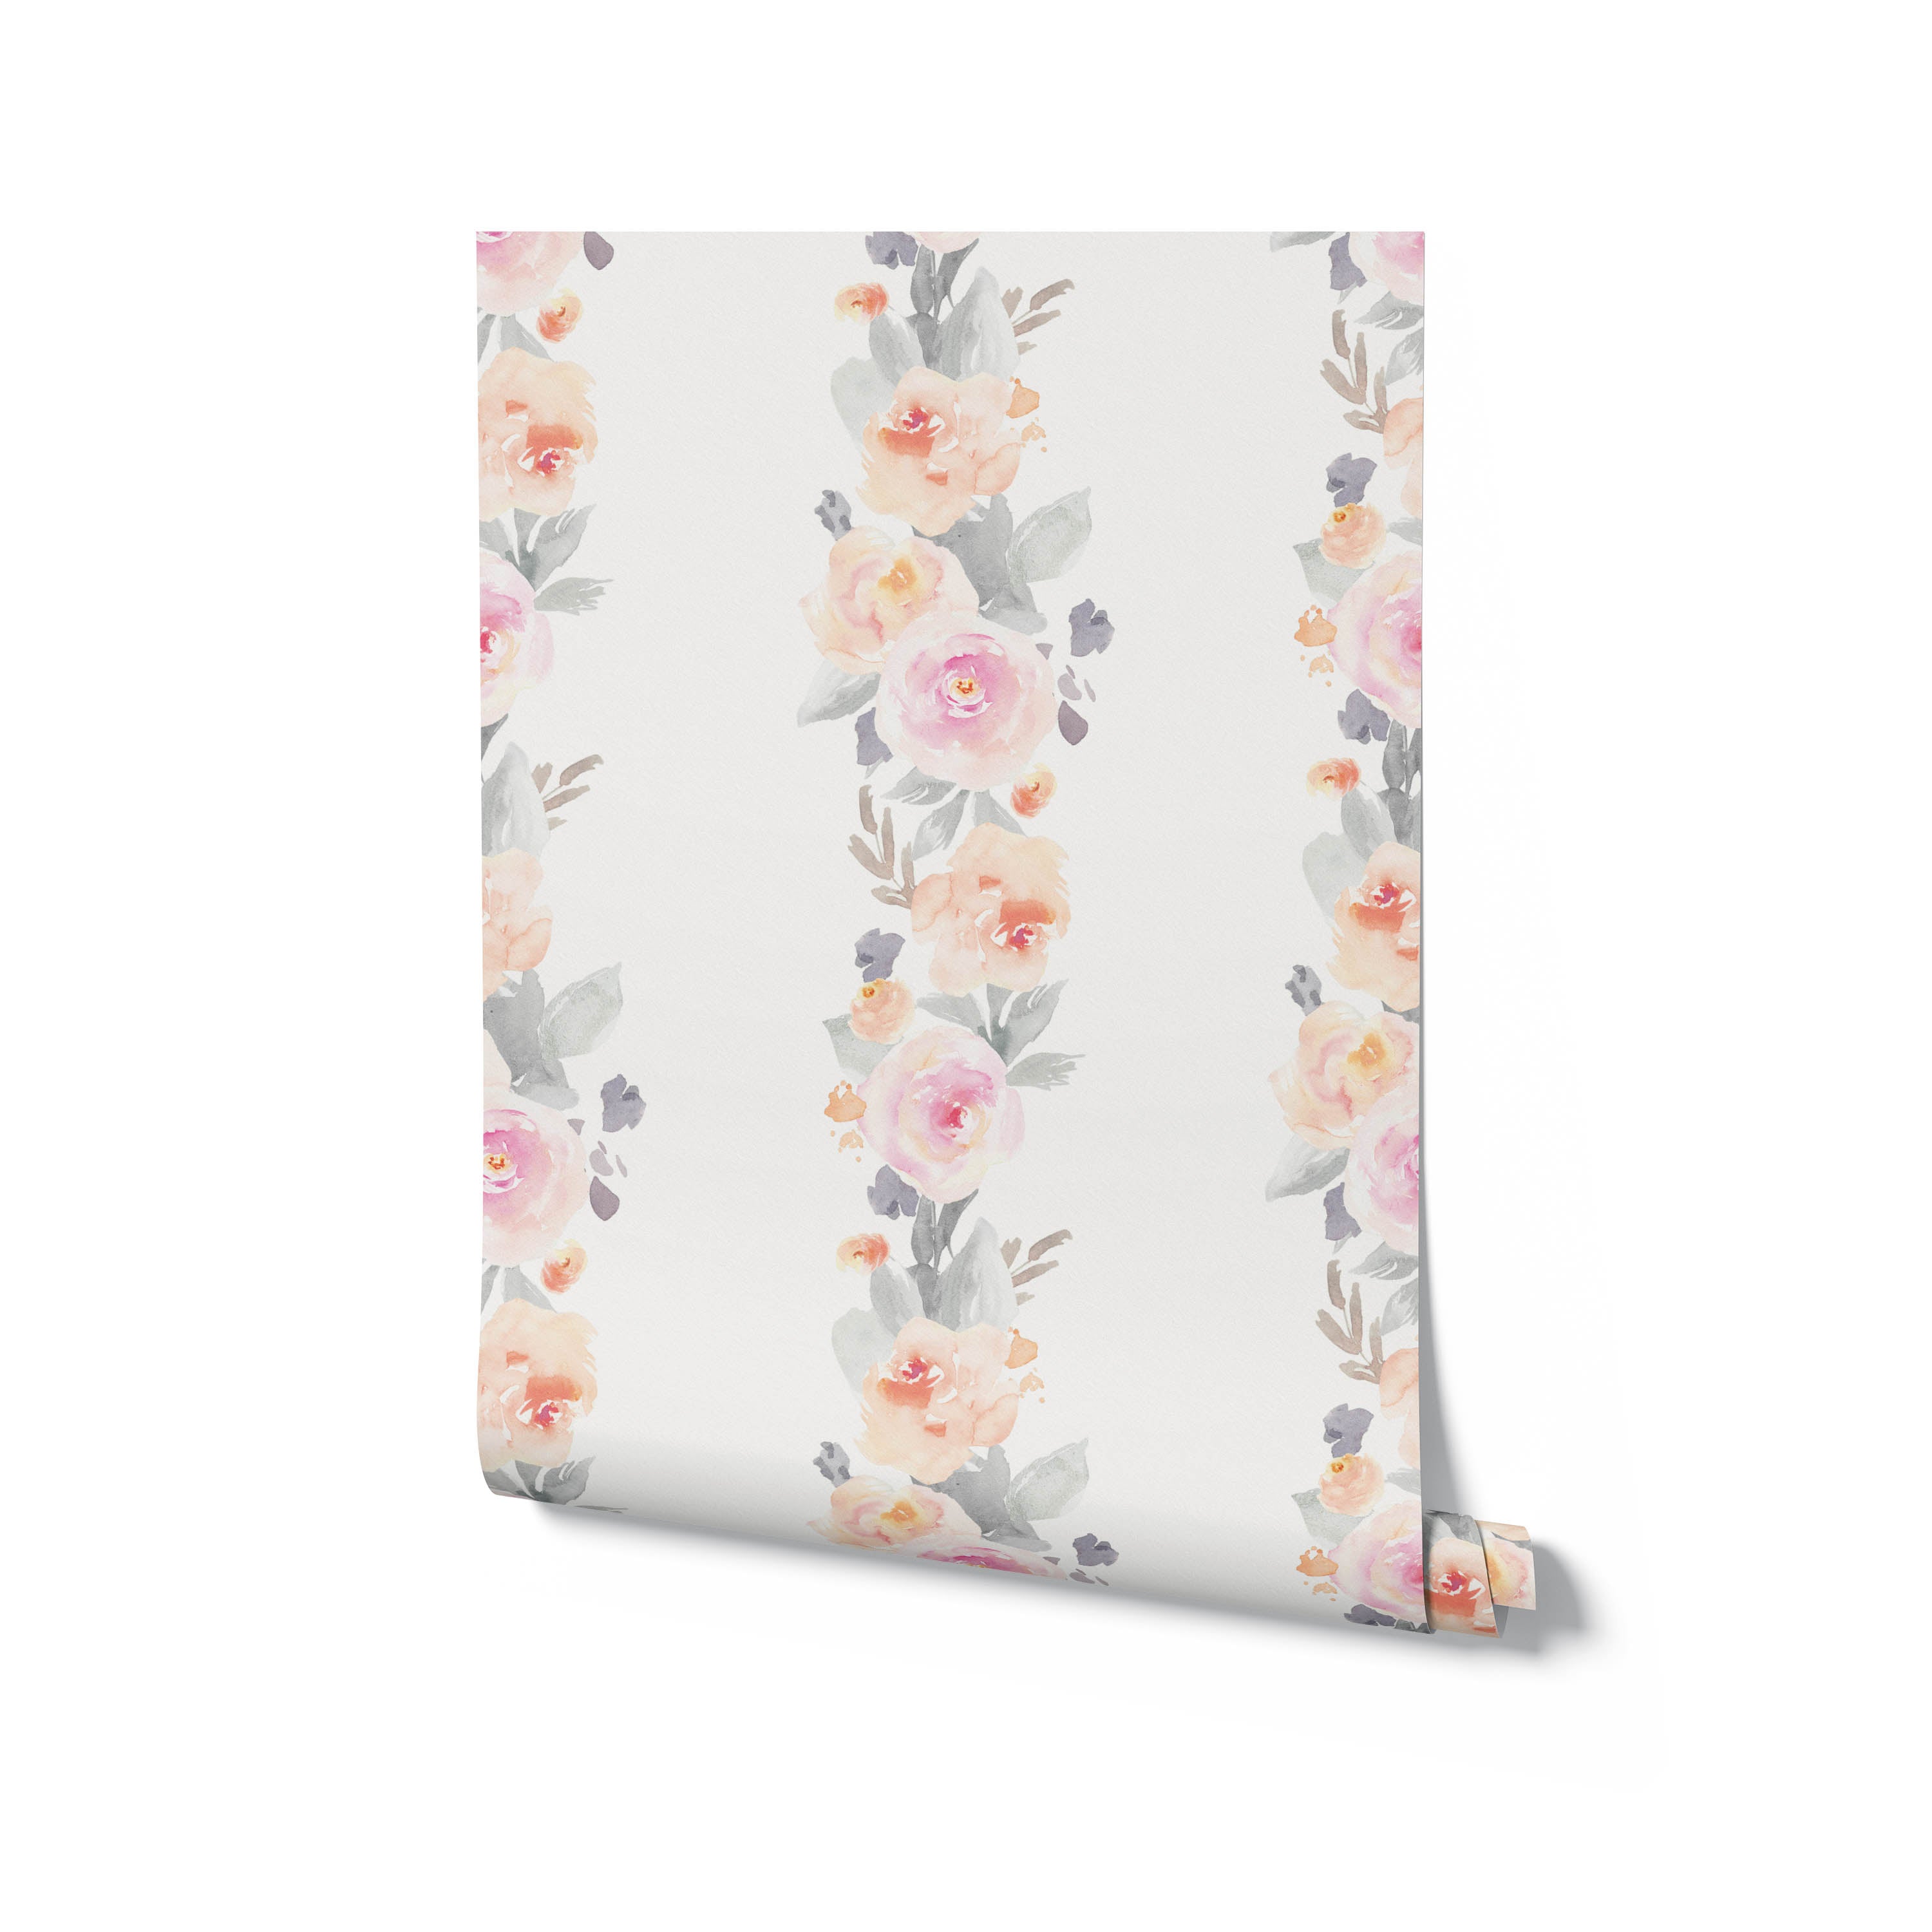 An image of a roll of Pastel Dreams Wallpaper, highlighting the soft watercolor floral pattern in pastel hues. This wallpaper roll is perfect for creating a calming and beautiful aesthetic in children's rooms or any space desiring a touch of softness and whimsy.